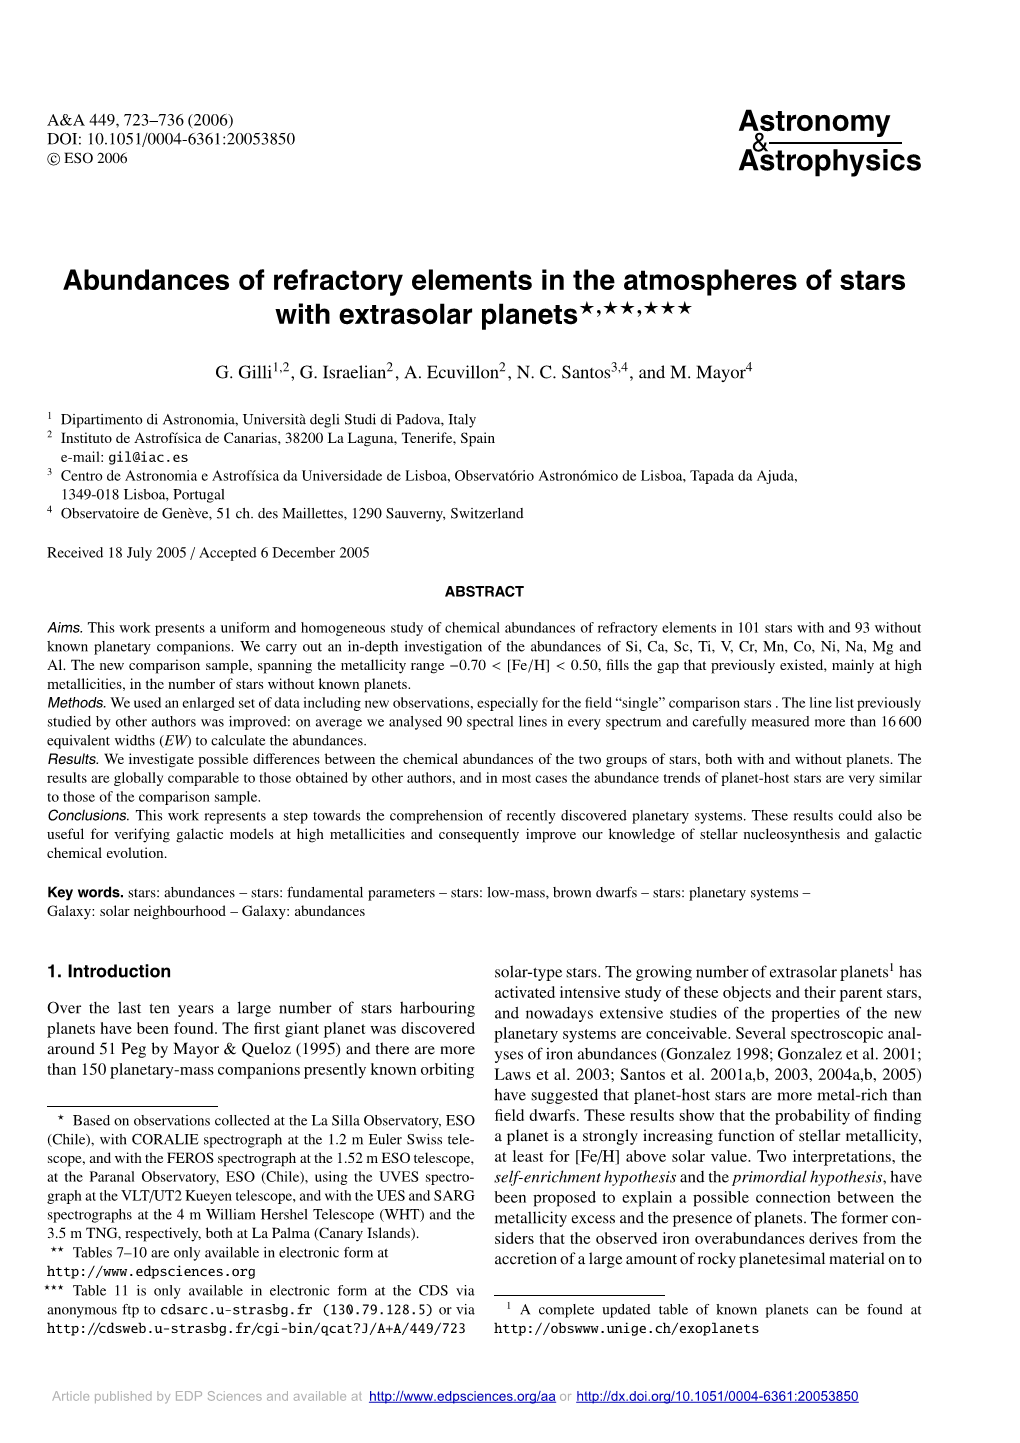 Abundances of Refractory Elements in the Atmospheres of Stars with Extrasolar Planets�,��,�